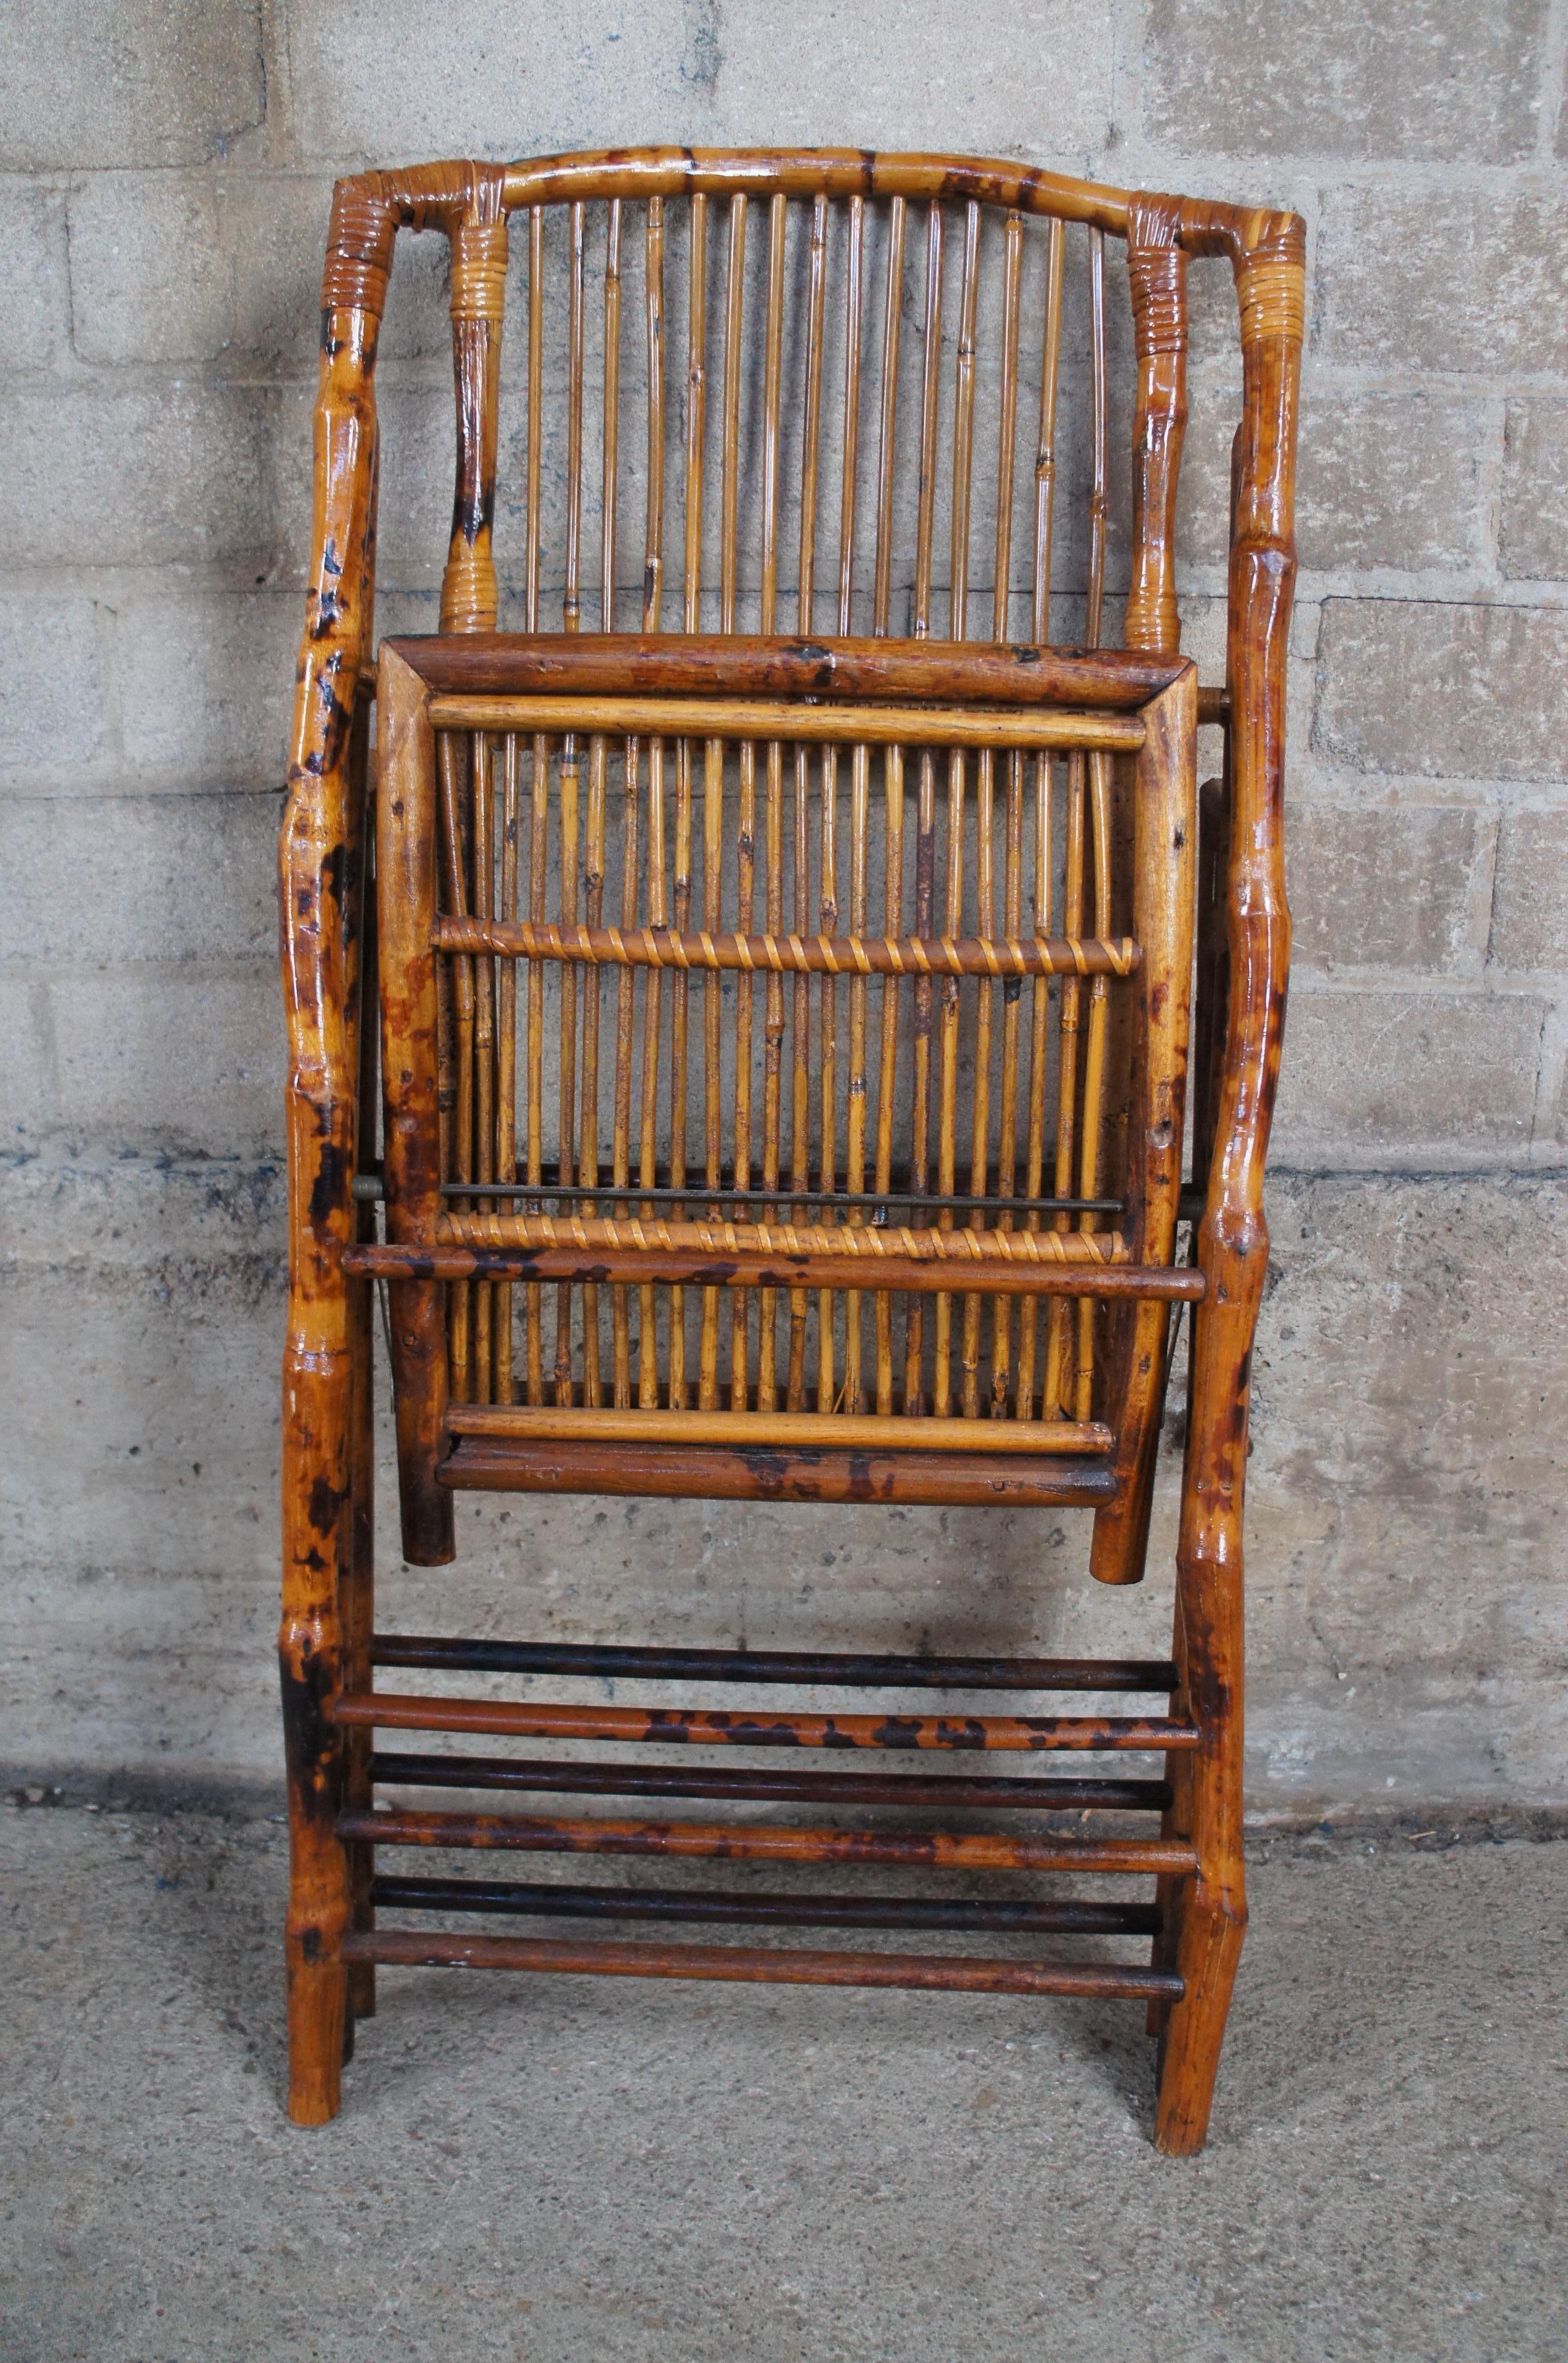 4 English Midcentury Scorched Bamboo & Rattan Folding Side Chairs Slatted Backs For Sale 5